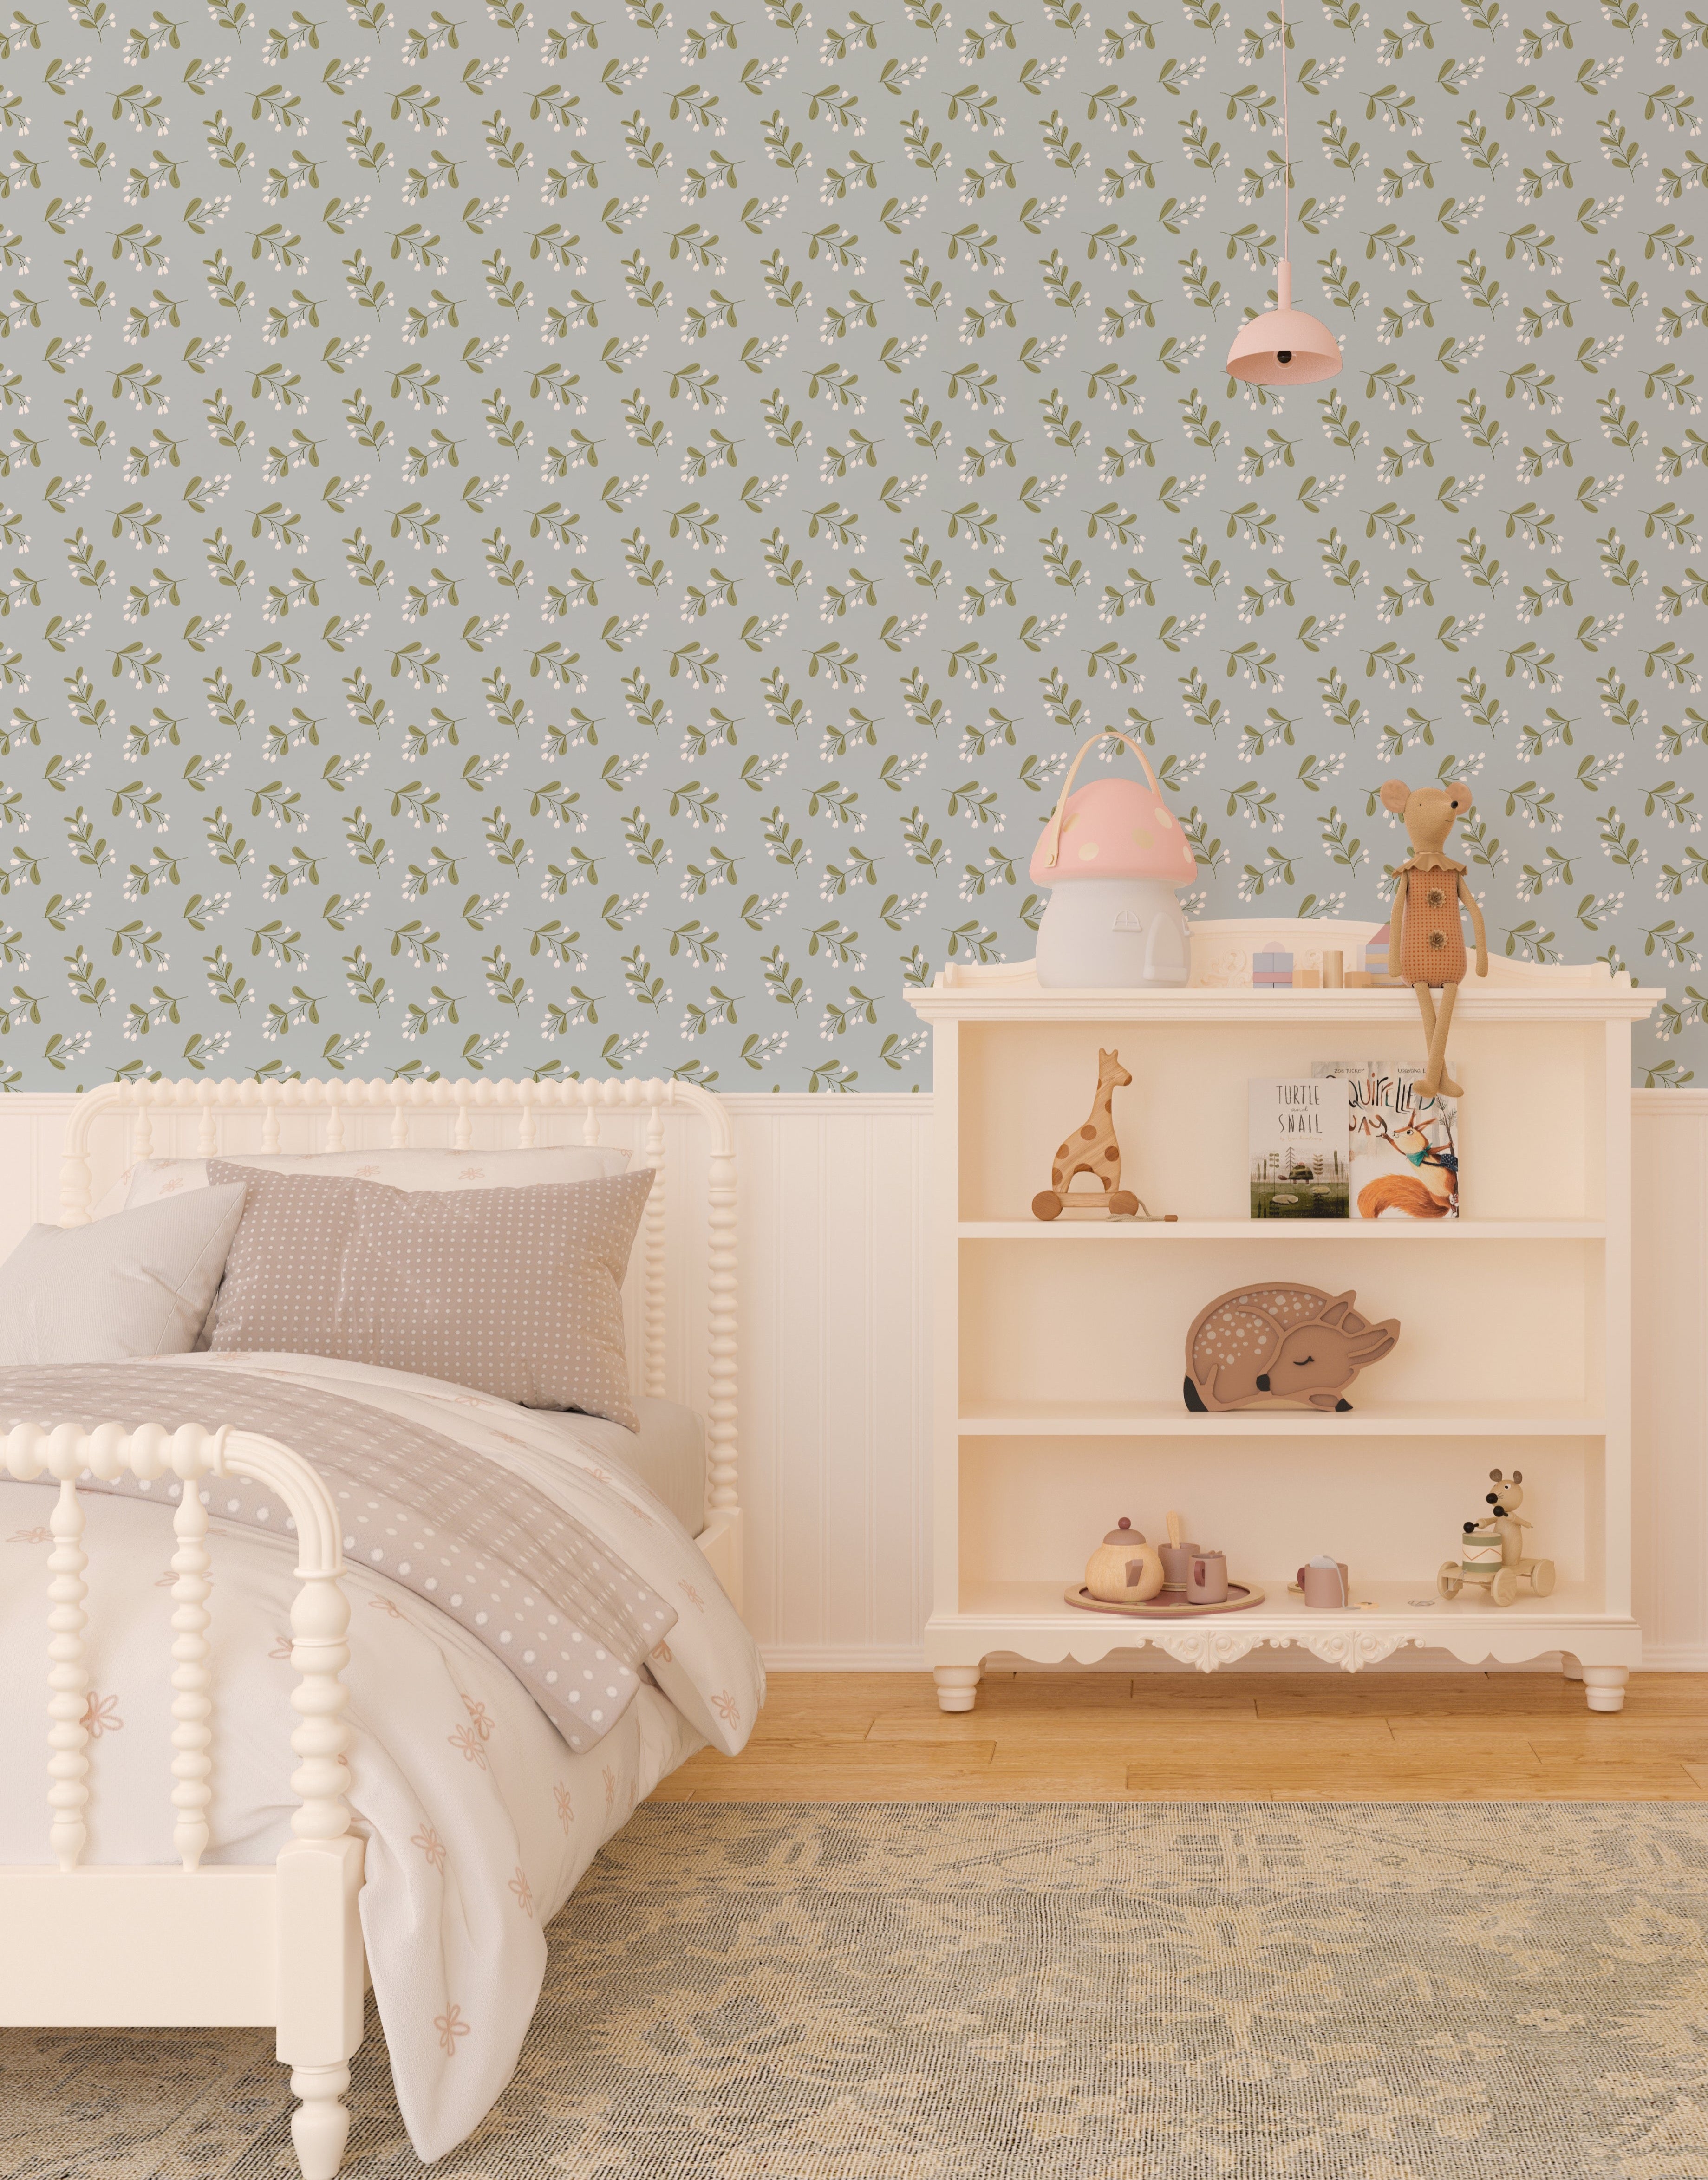 Interior view of a child's bedroom with Simple Floral Wallpaper - 12.5" on the feature wall. The wallpaper displays a charming pattern of small white flowers and green foliage on a soft blue background, enhancing the room's cozy and playful decor.